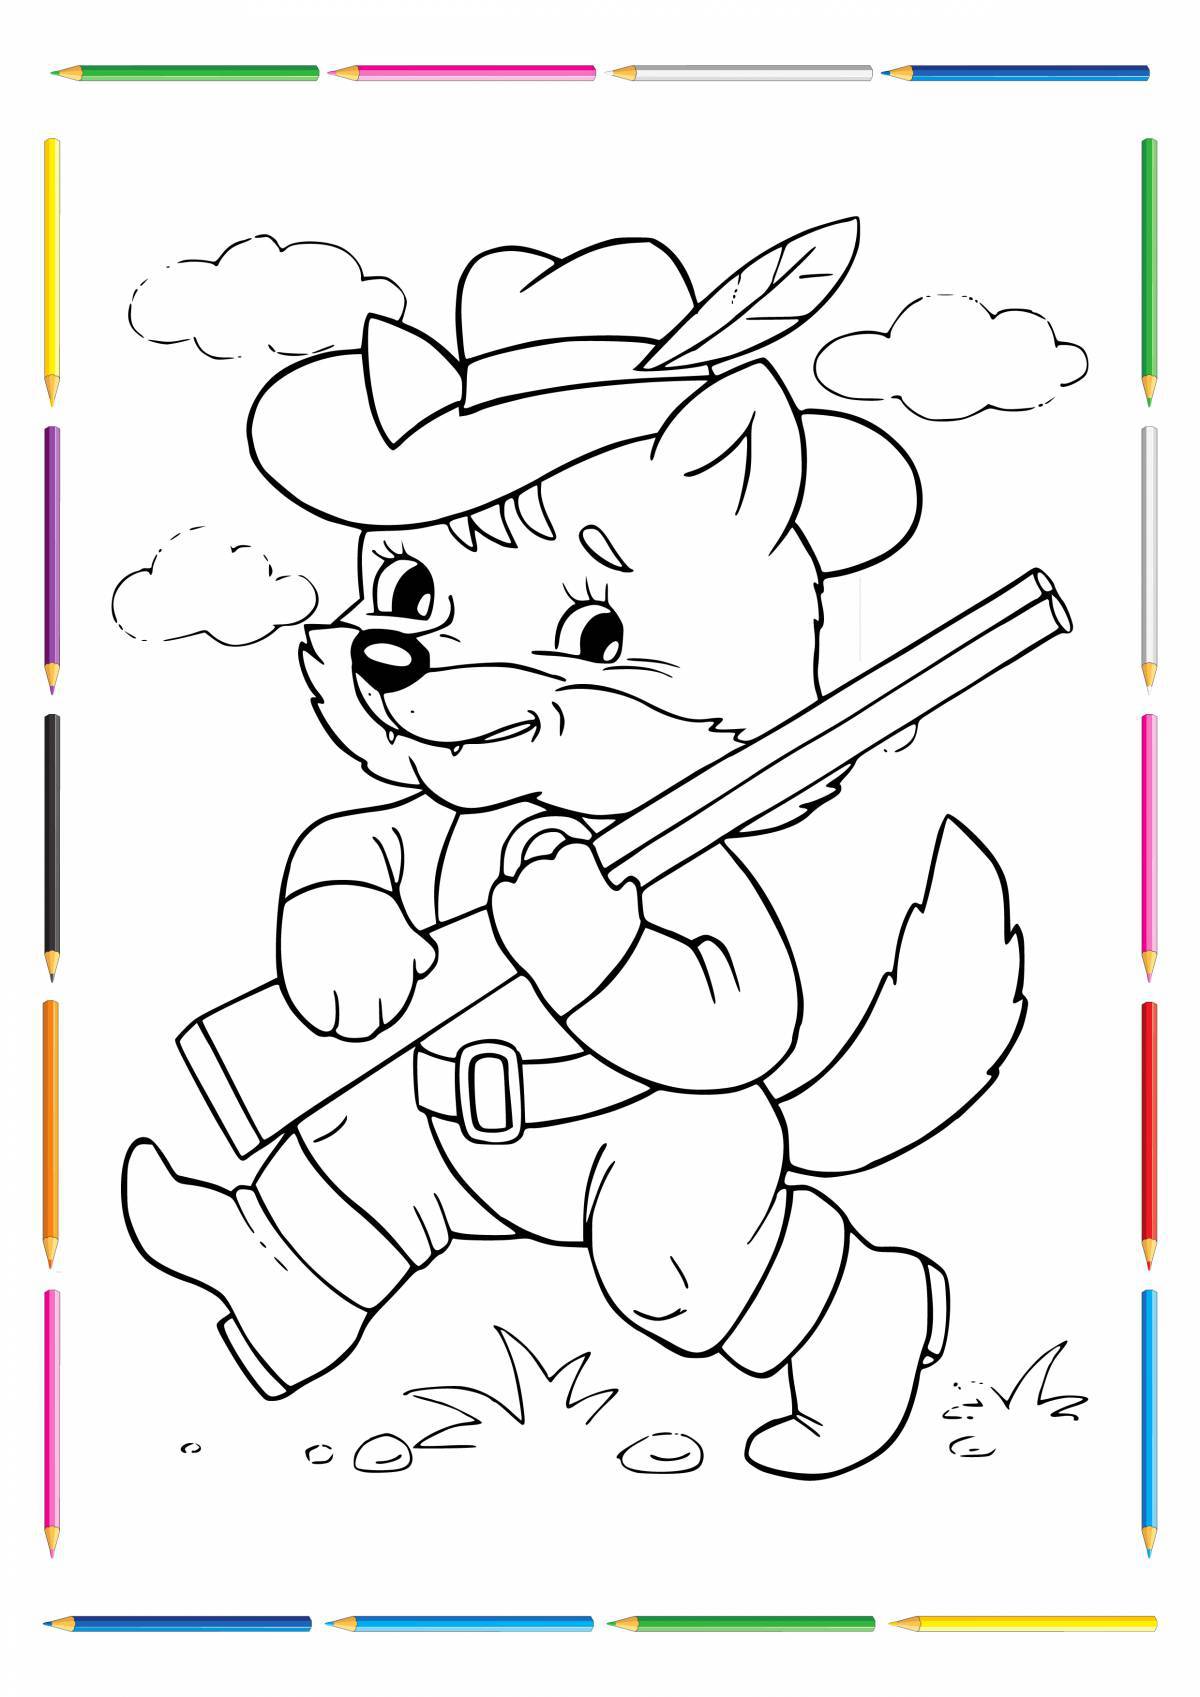 Colourful coloring book for children 5-6 years old